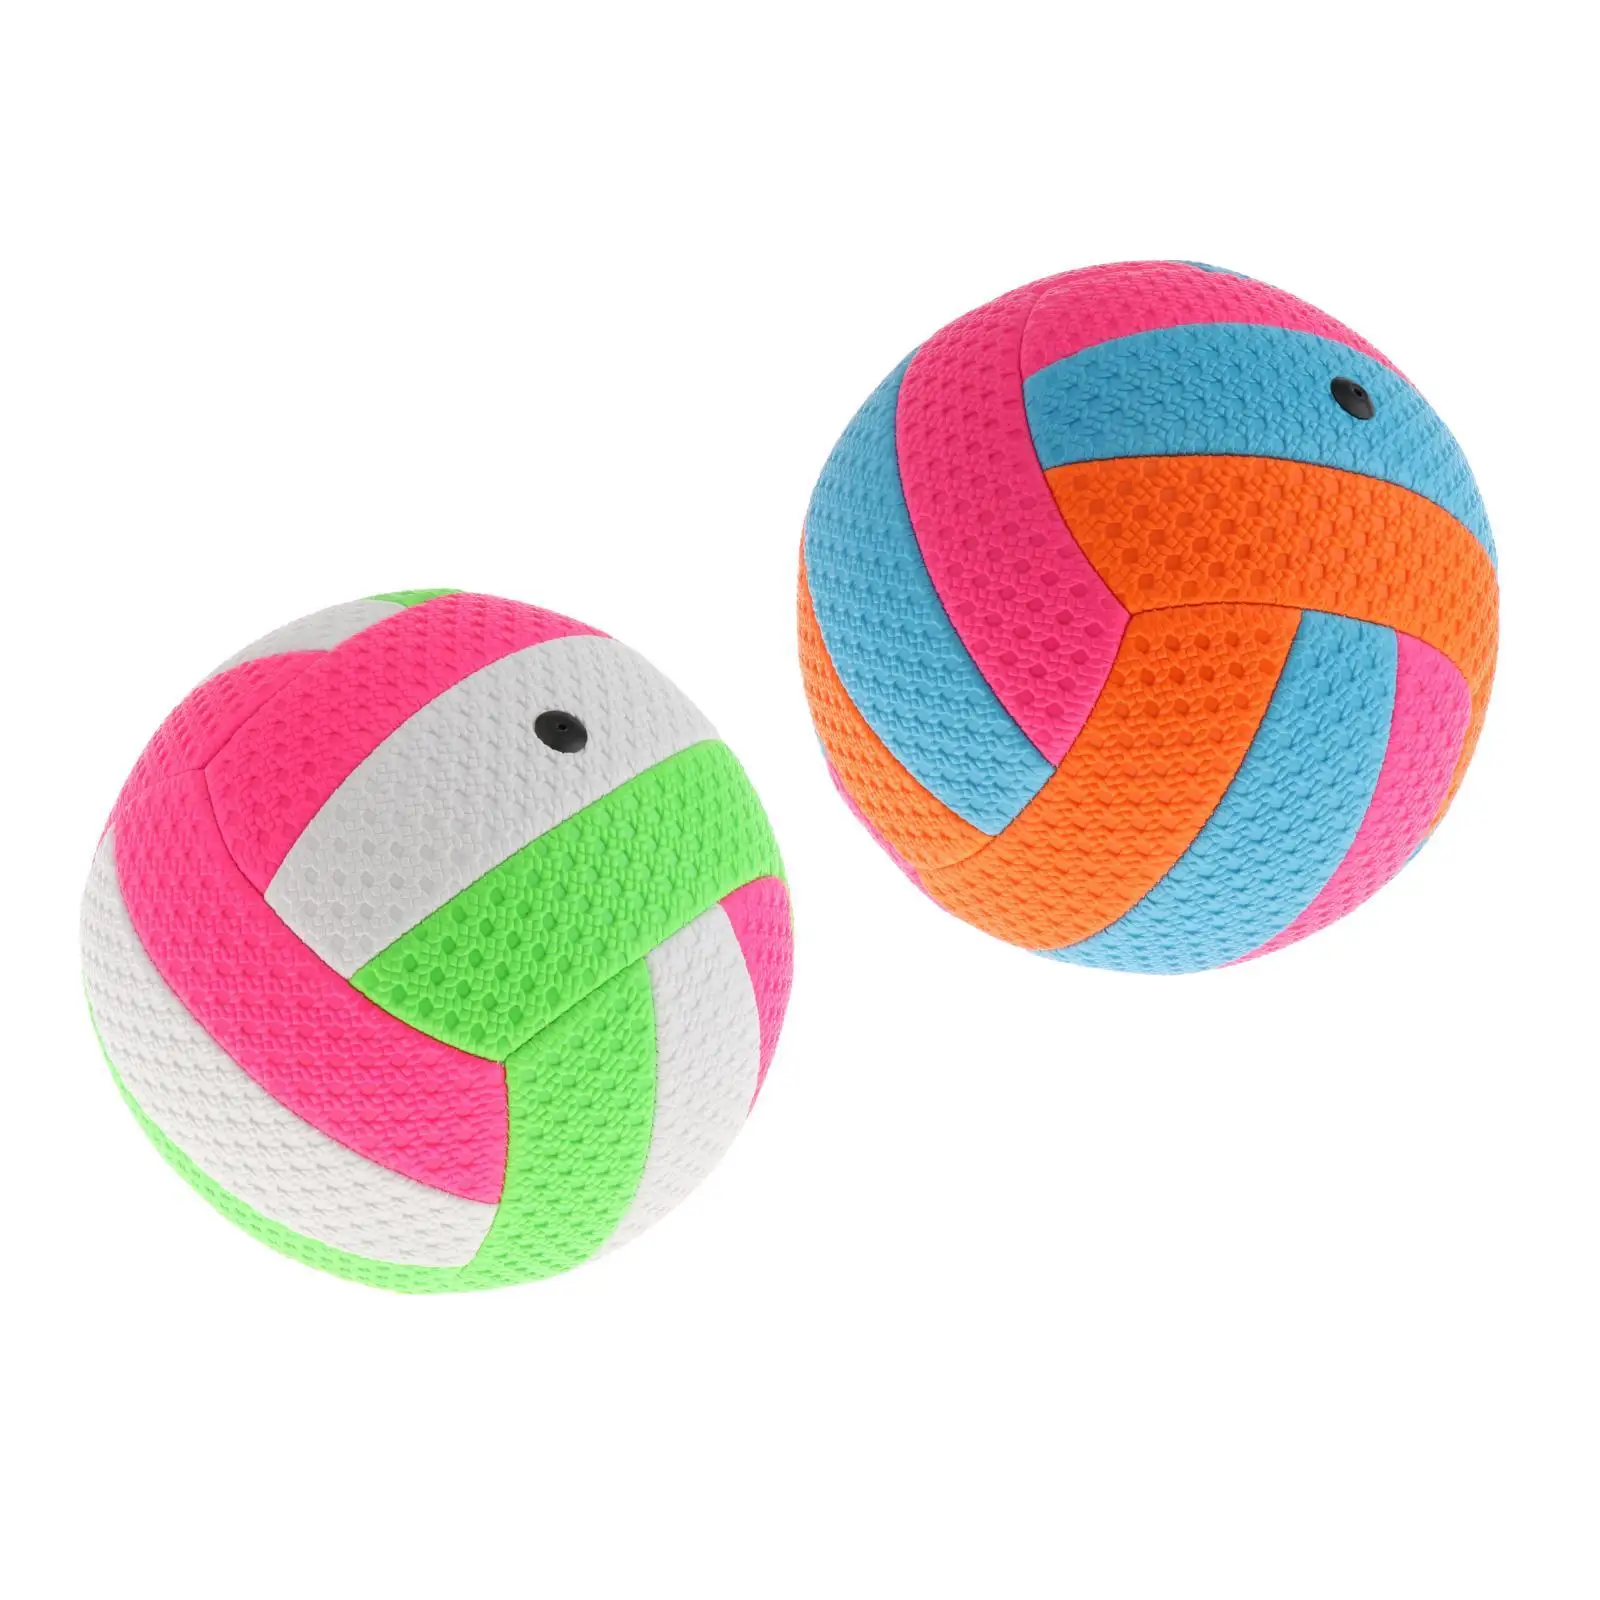 Volleyball Size 2 Training Practice Volley Ball for Kids, 5.9inch Child Toy for Backyard